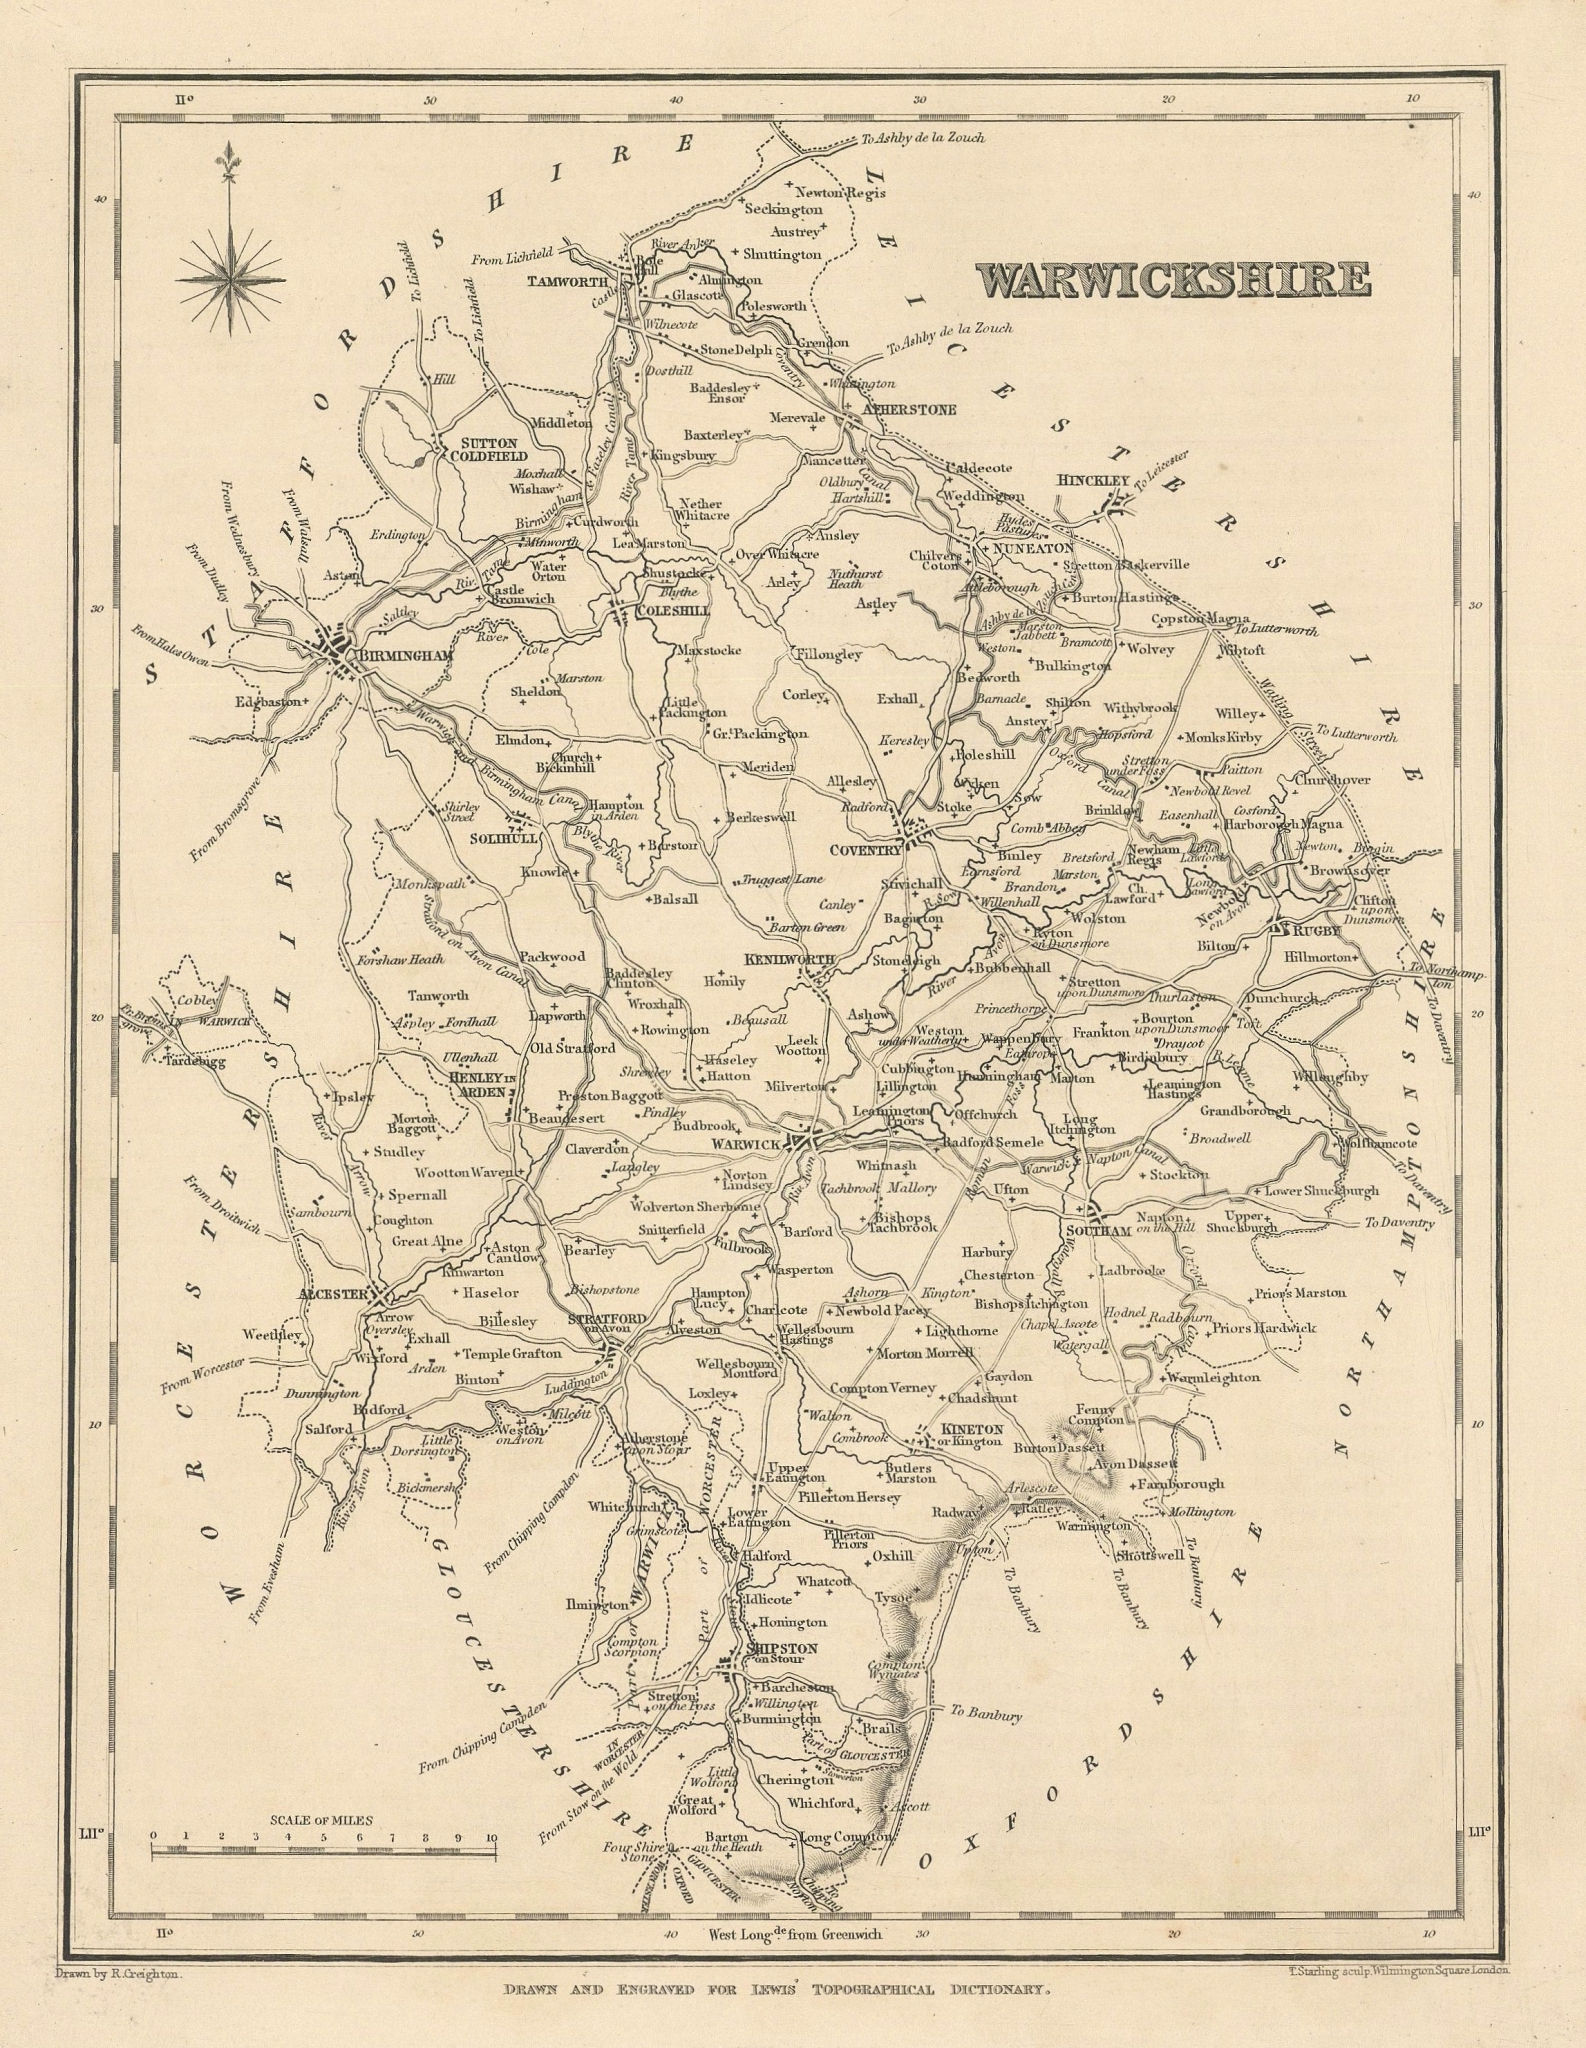 Antique county map of WARWICKSHIRE by Starling & Creighton for Lewis c1840